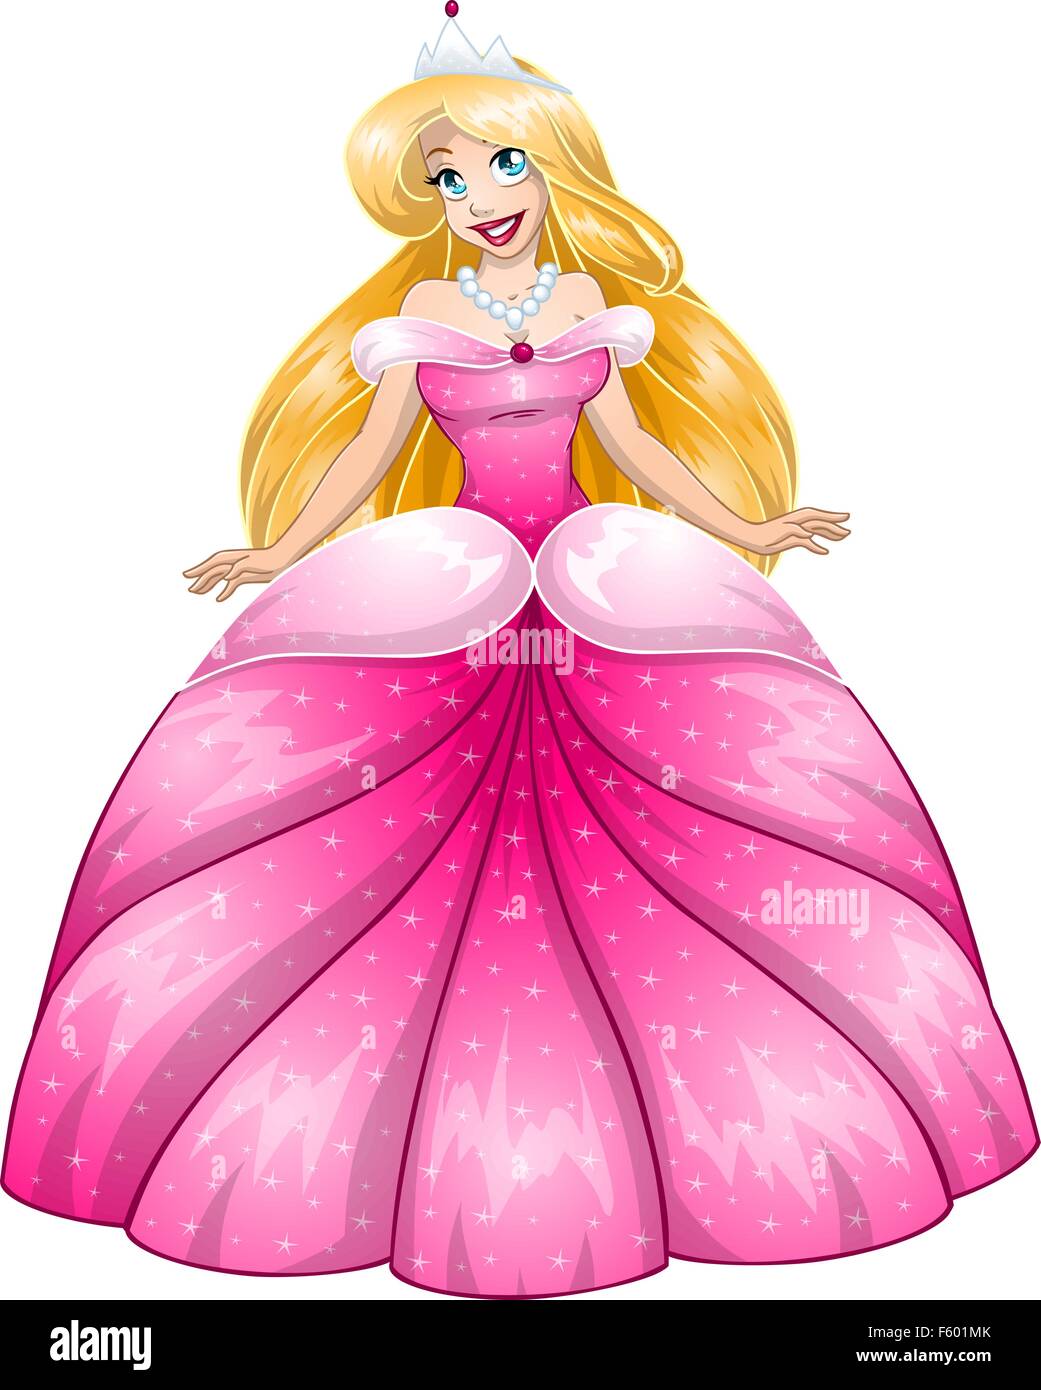 Vector illustration of a beautiful blond princess in pink dress. Stock Vector